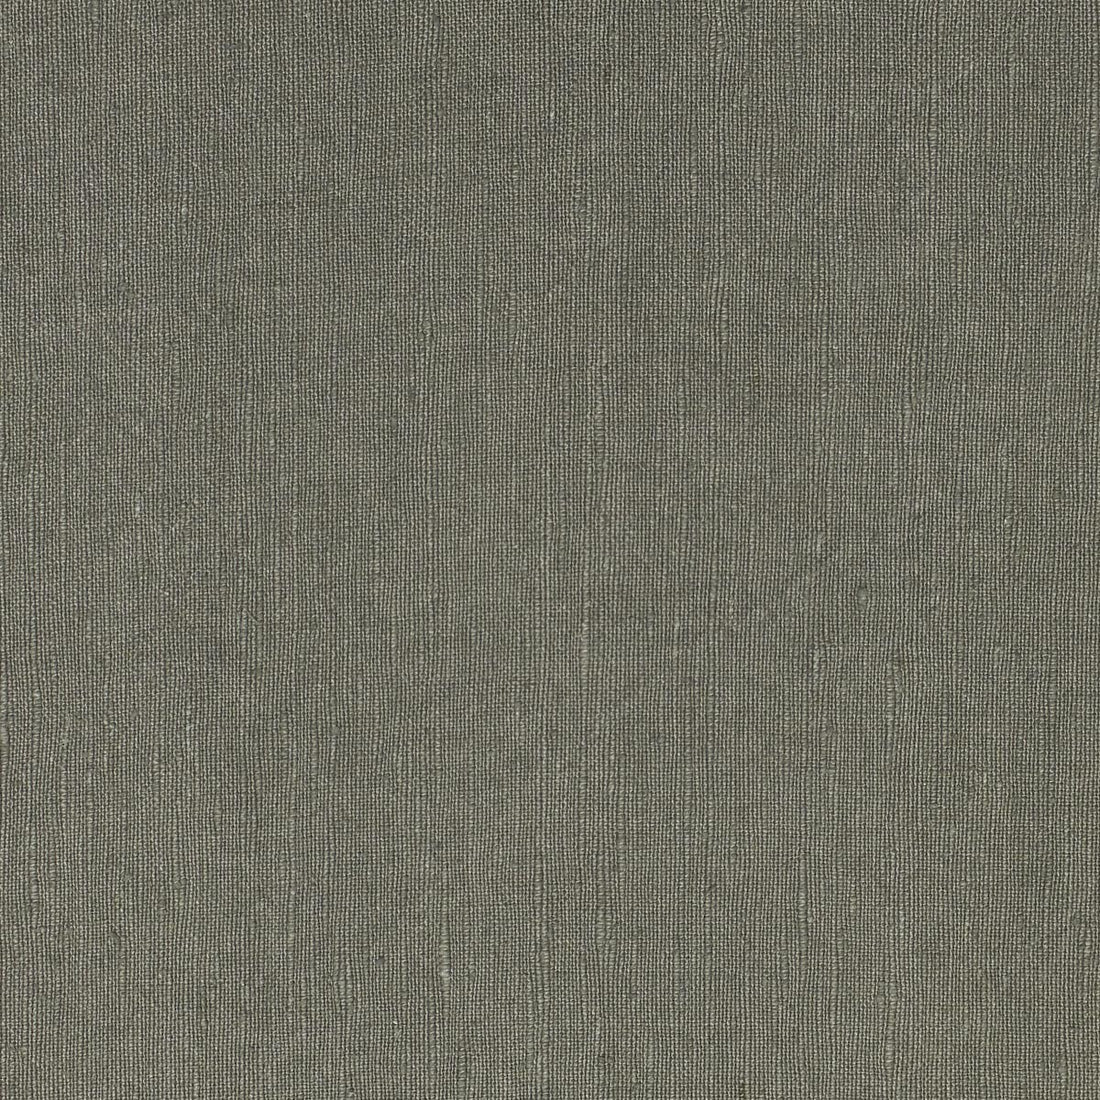 Linnet fabric in 1 color - pattern LZ-30415.01.0 - by Kravet Couture in the Lizzo collection